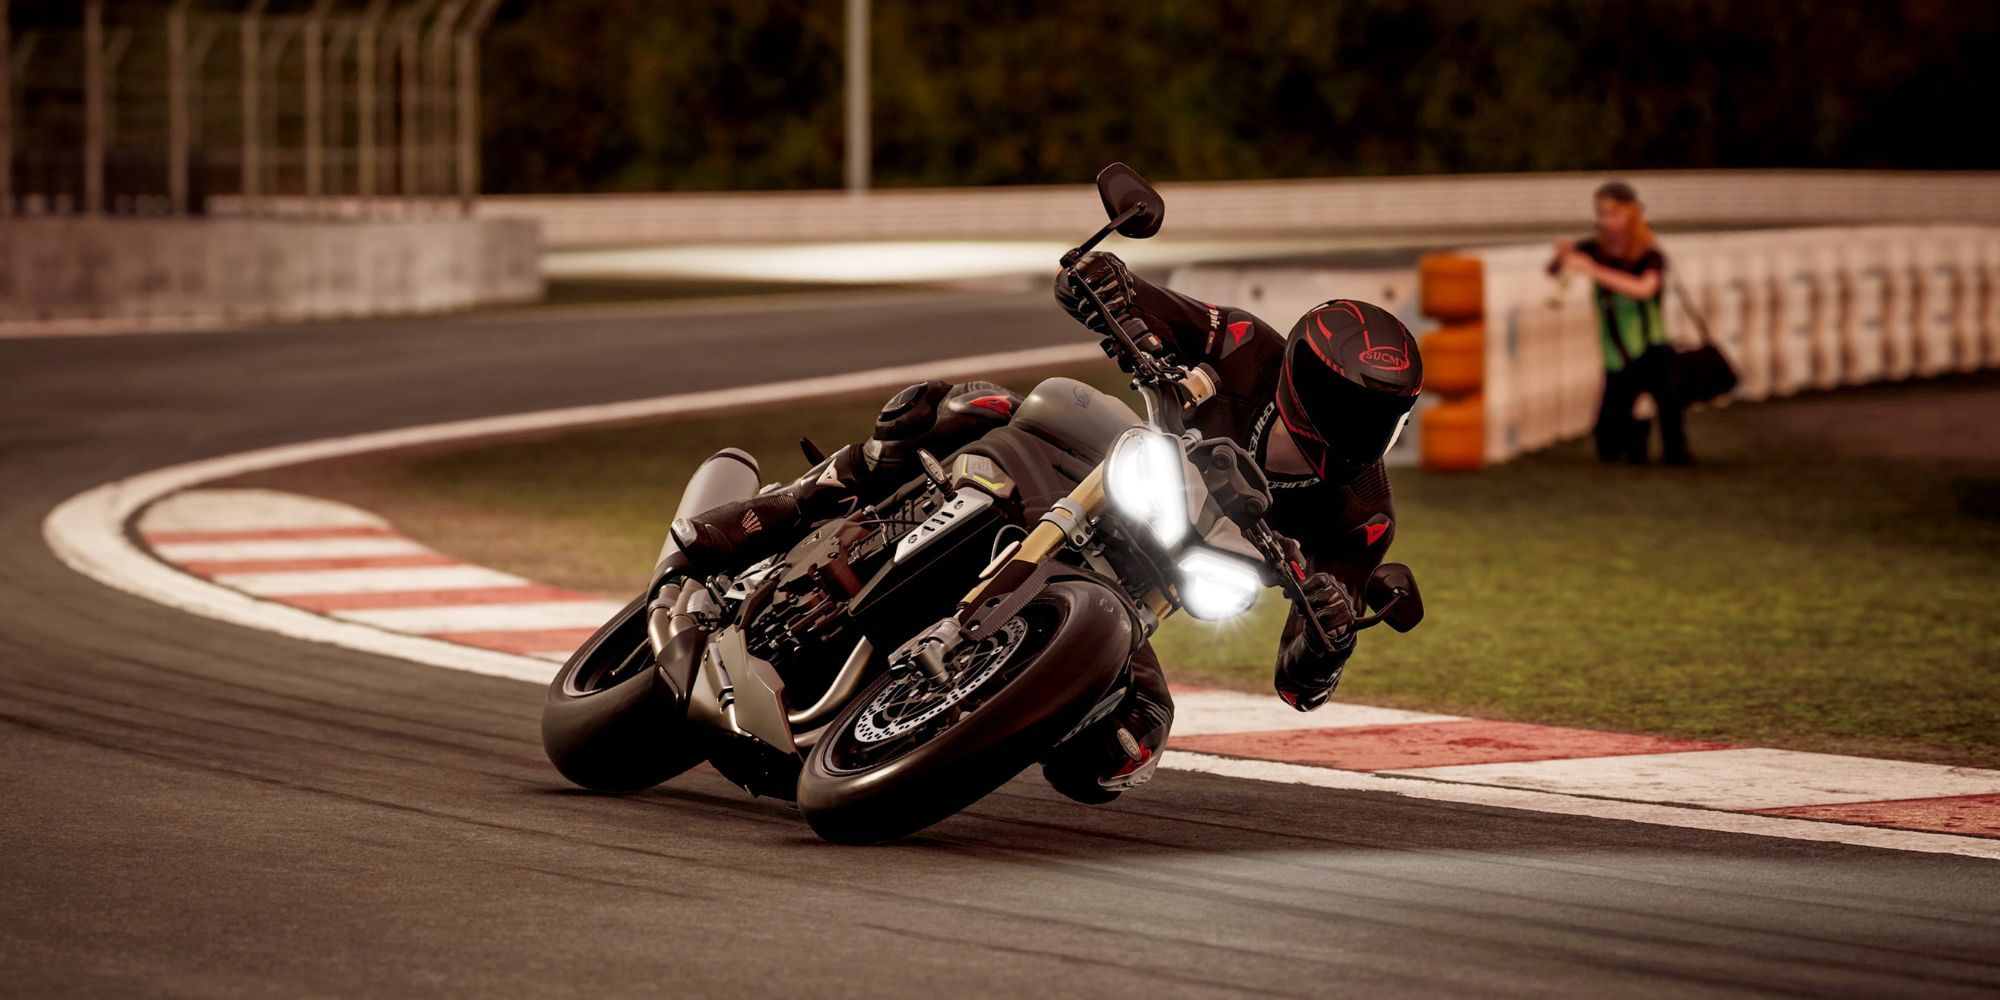 A black sports bike with bright headlights rounds a bend at high speed.